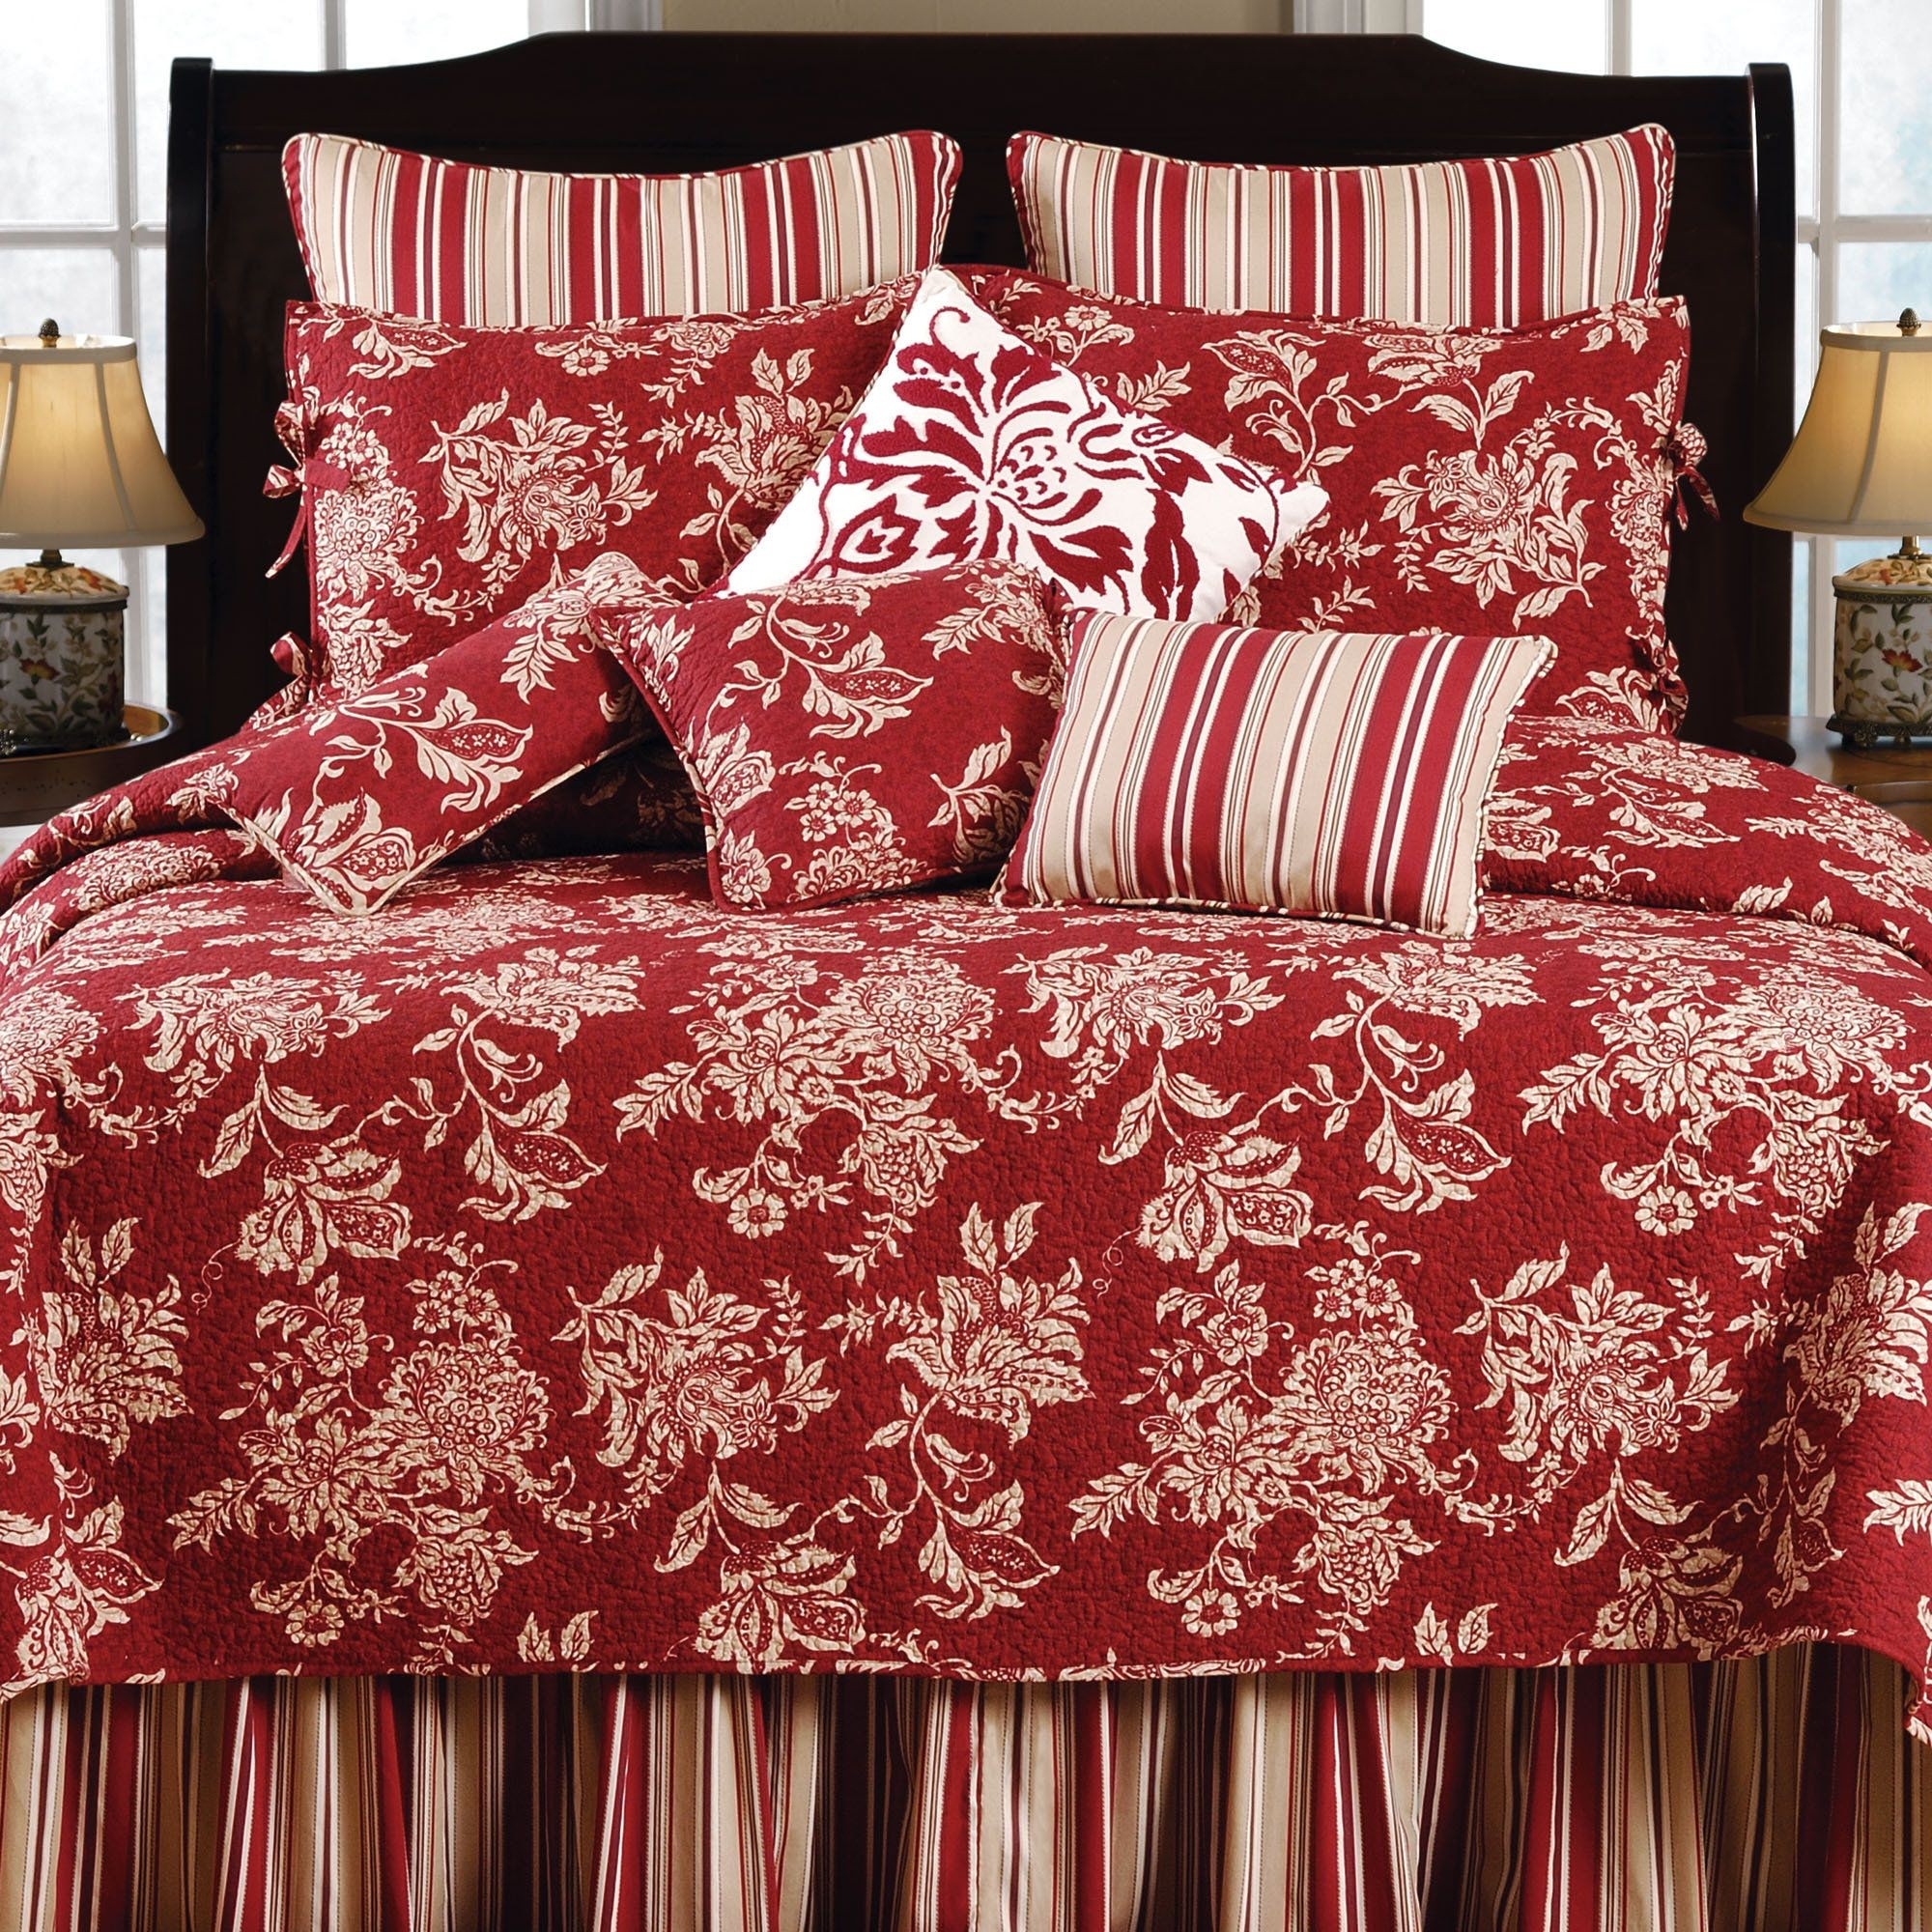 French country bedding sets